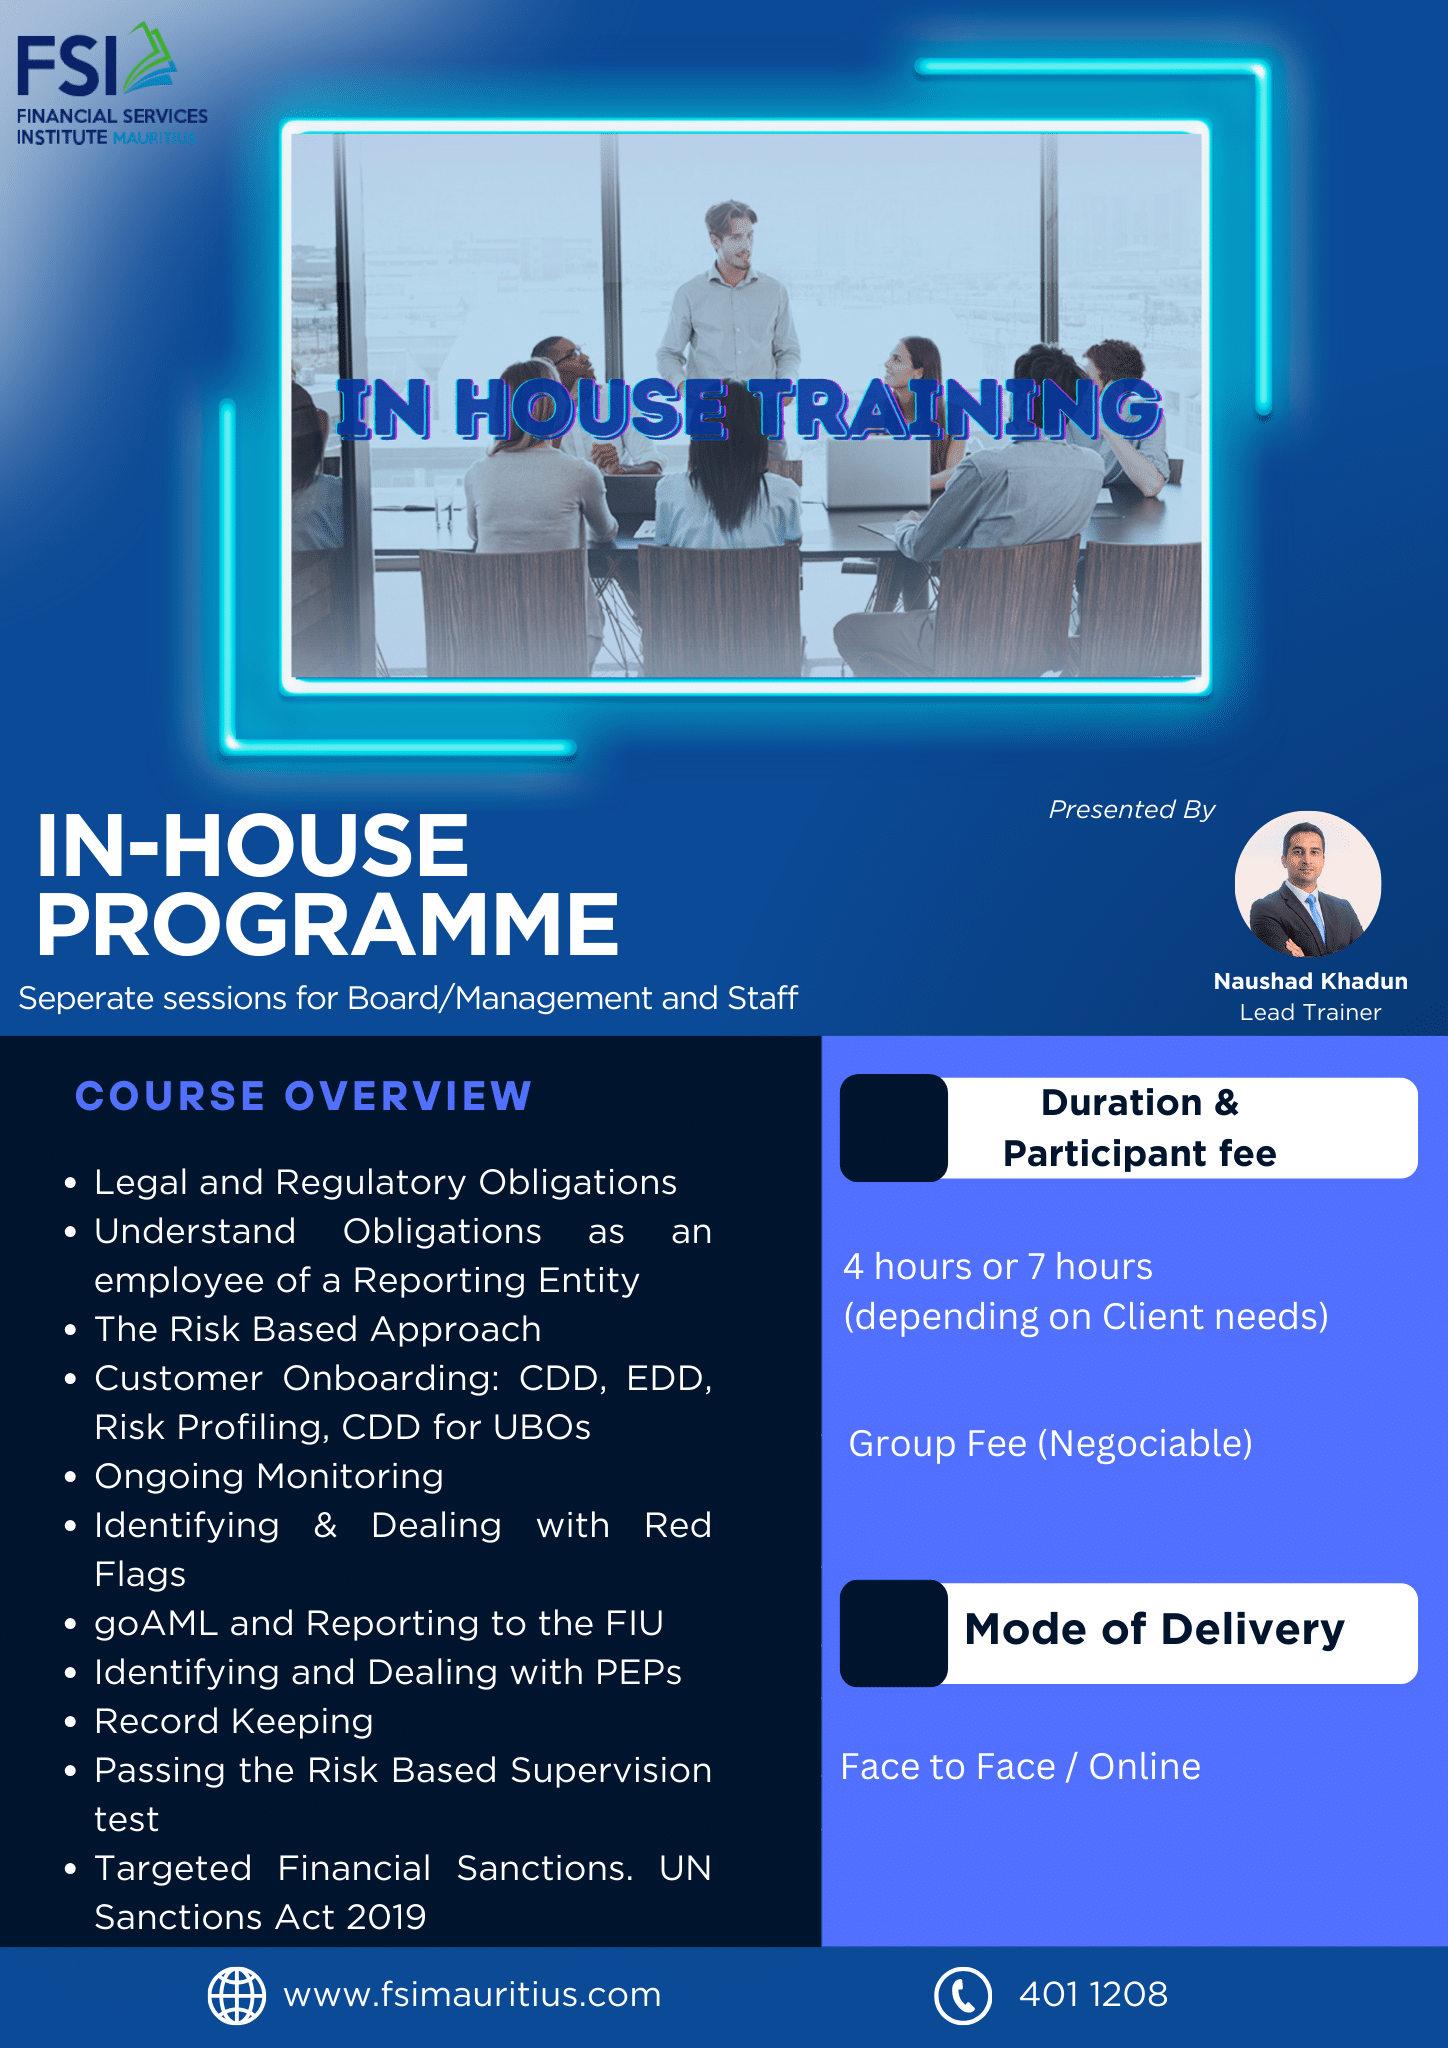 In-House Programme